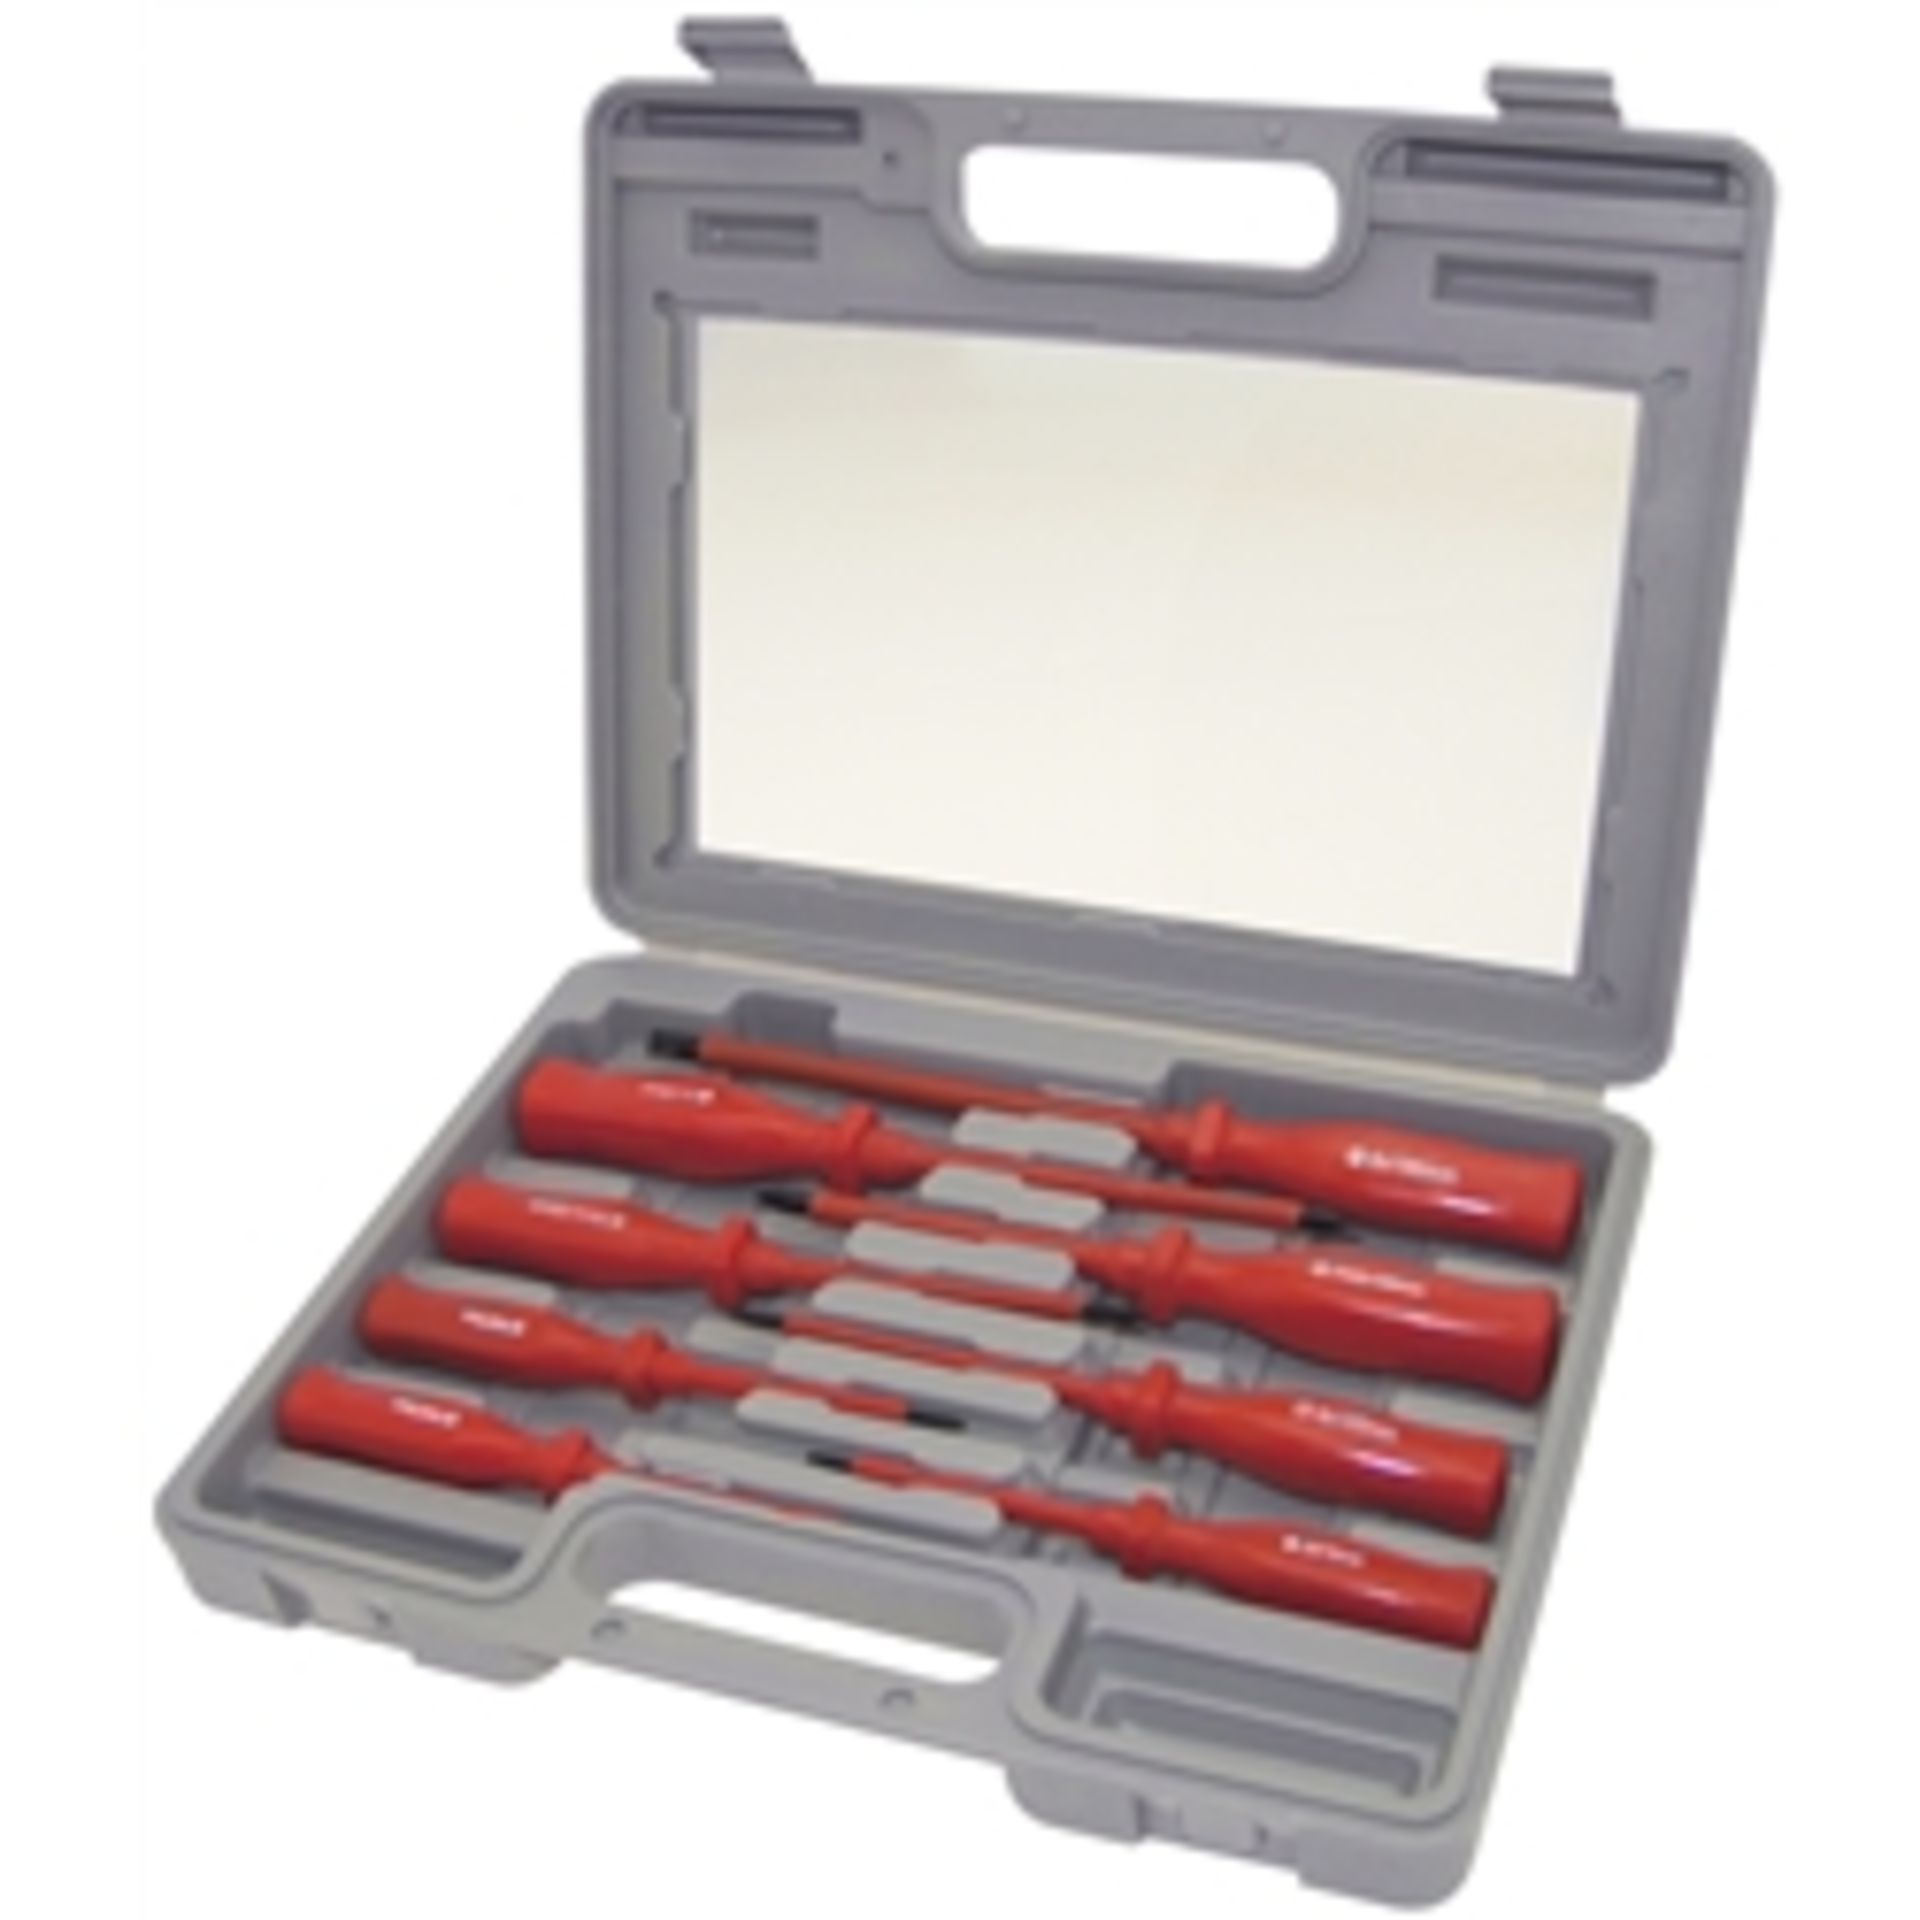 V *TRADE QTY* Brand New Eight Piece Screwdriver Set In Carry ase X 3 YOUR BID PRICE TO BE MULTIPLIED - Image 2 of 2